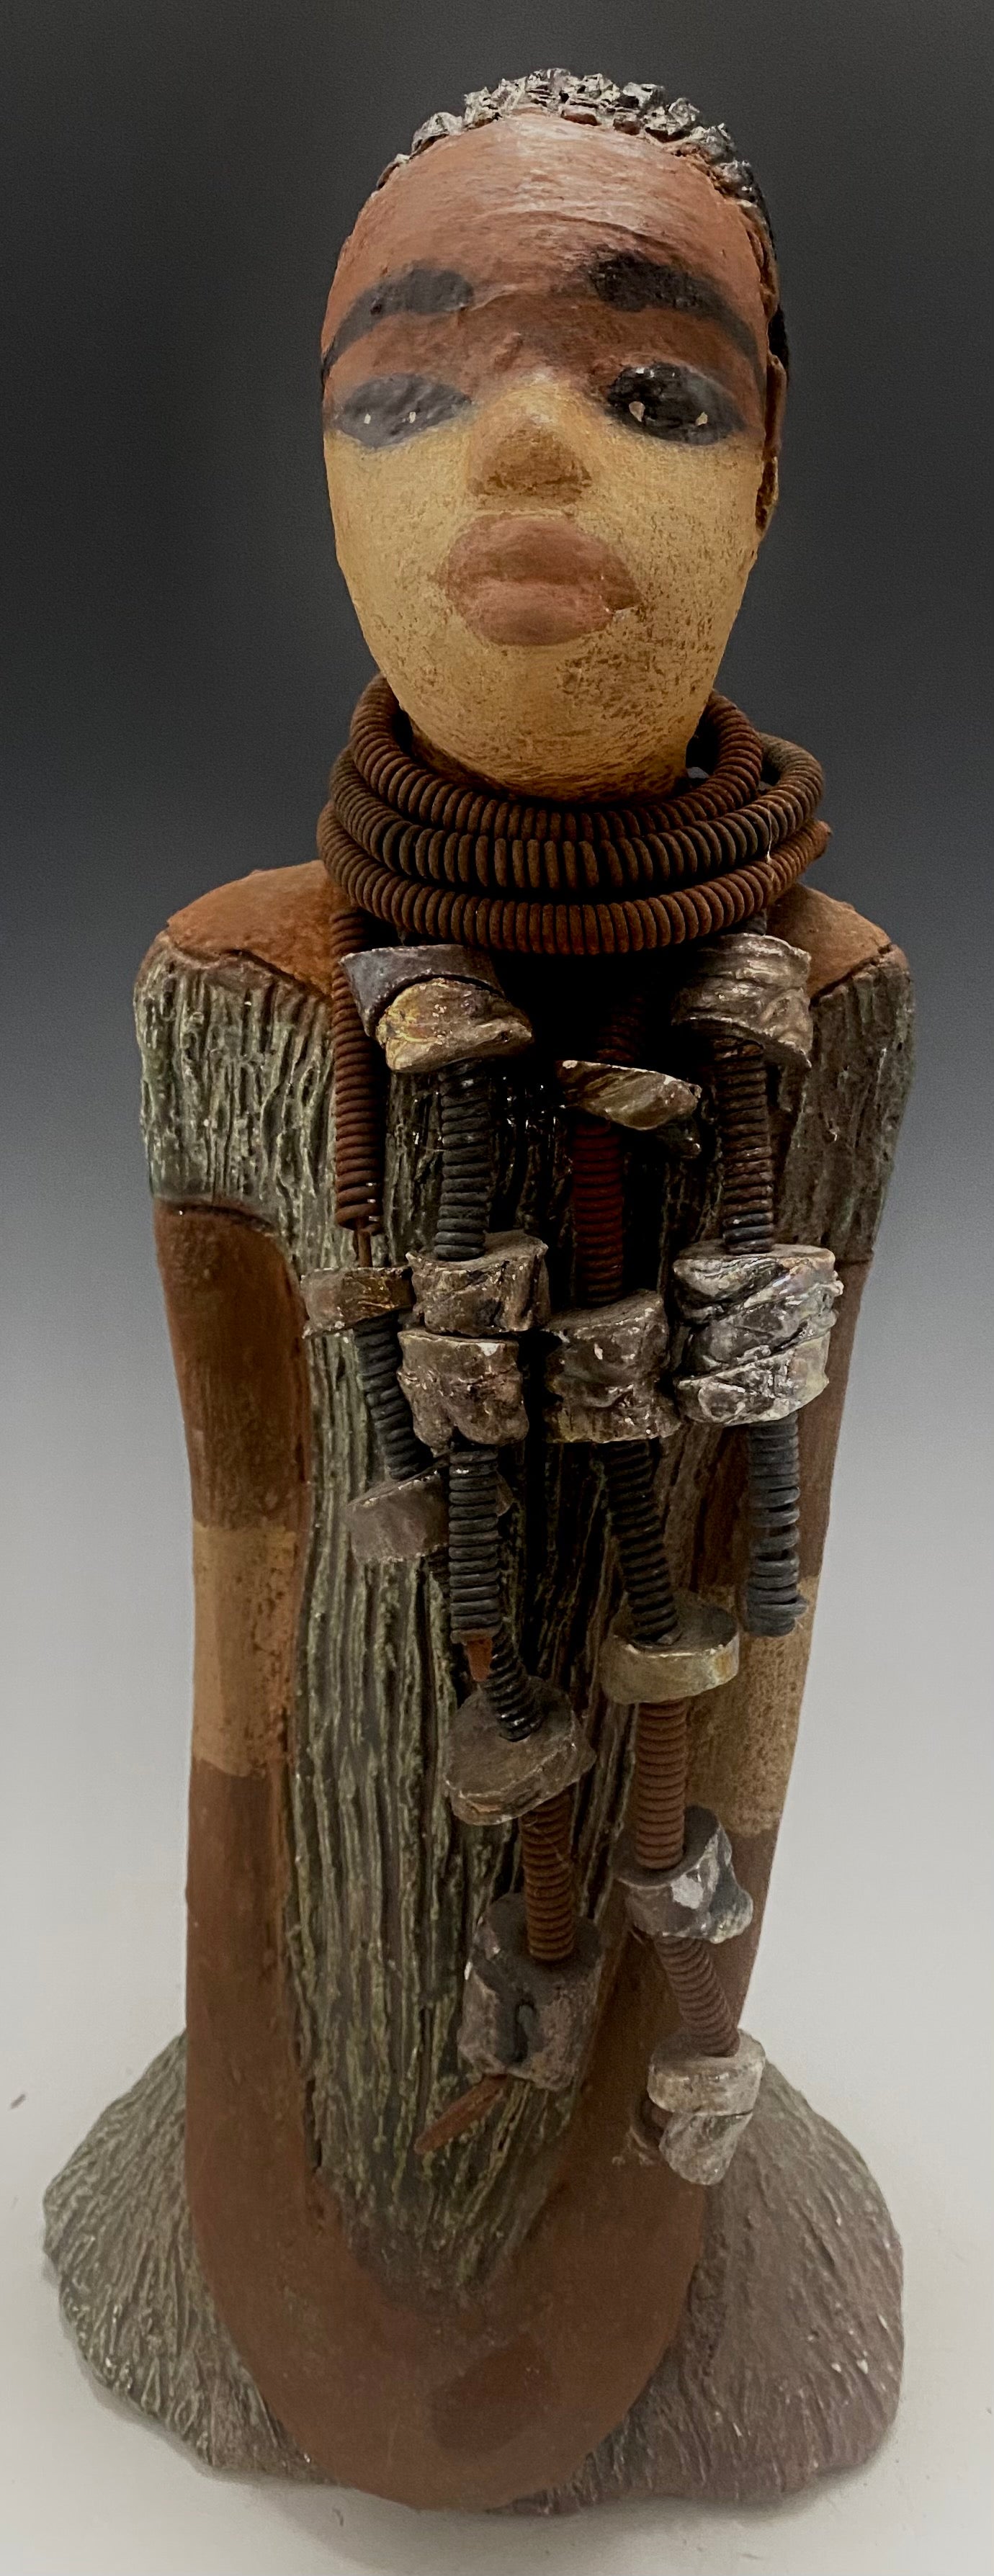 Meet Jana J! Jana J stands 13" x 6" x 5" and weighs 3.09 lbs Jana has a lovely two tone honey brown complexion. She wears a long strand of raku beads around her neck. Give Jana J in a special place in your home!